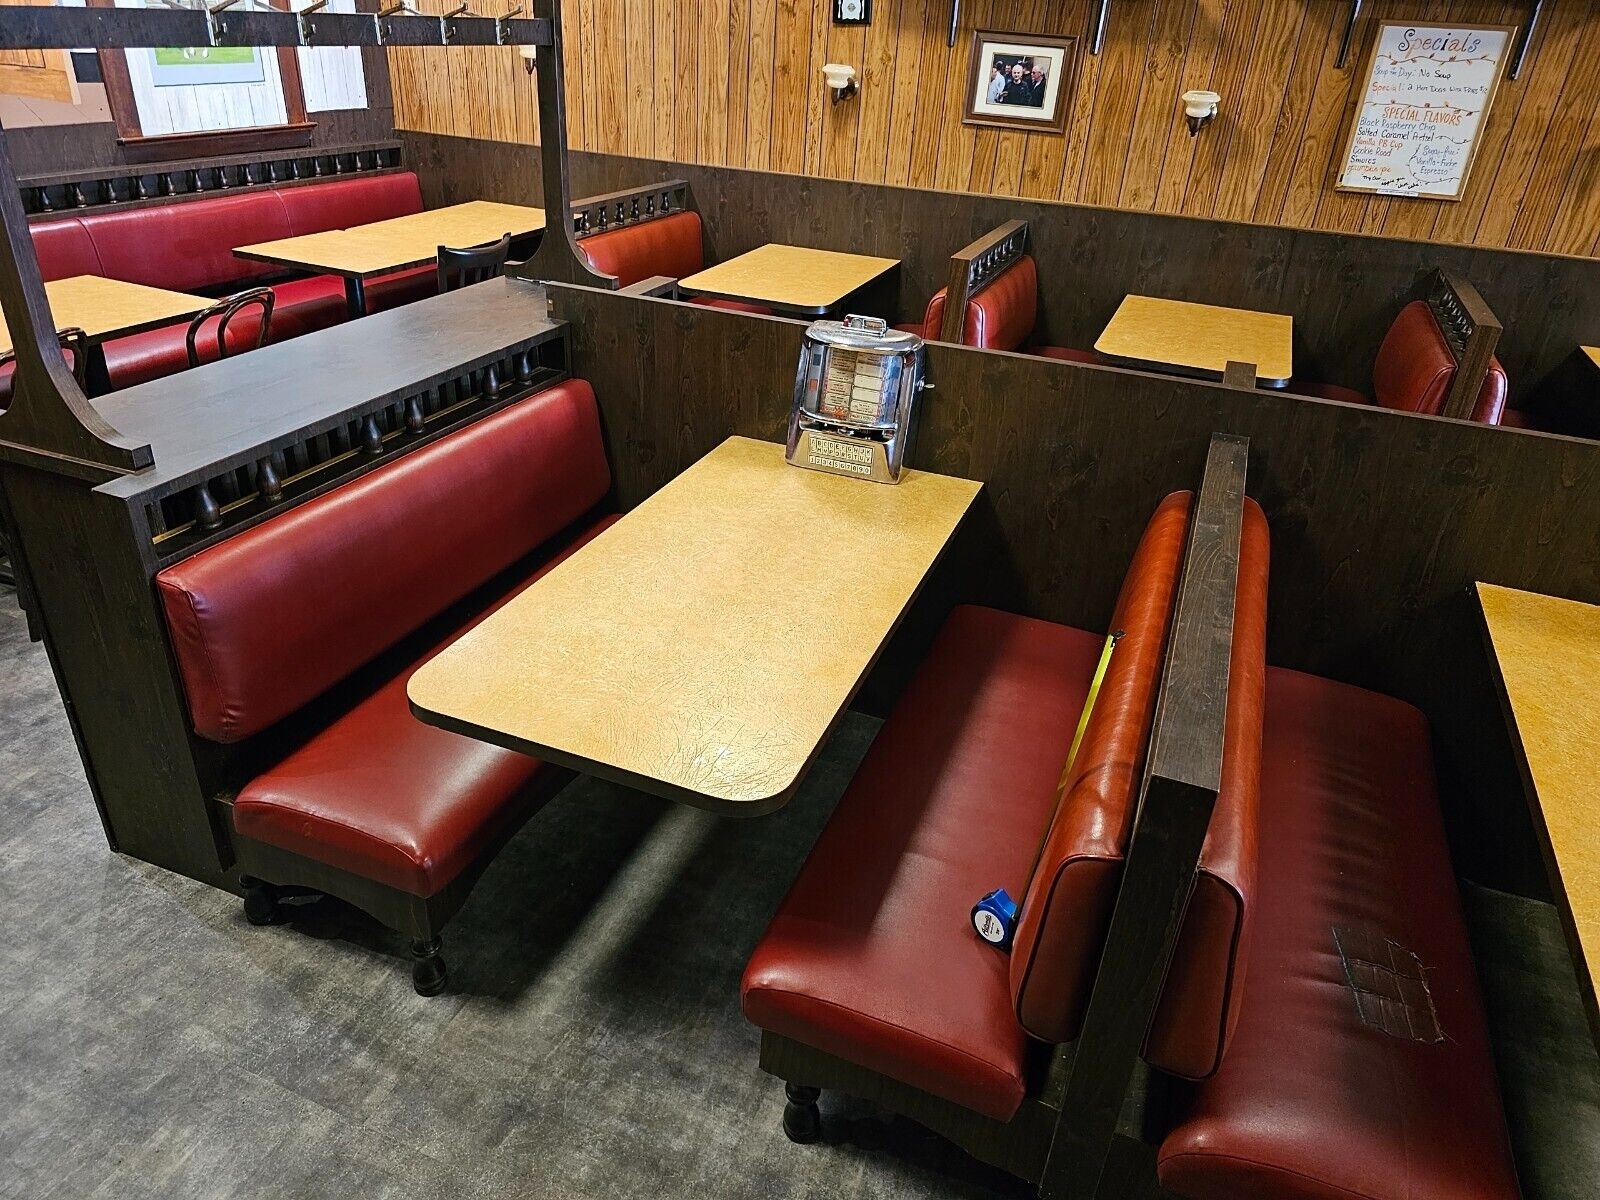 An empty diner with booths, a jukebox, and vintage decor